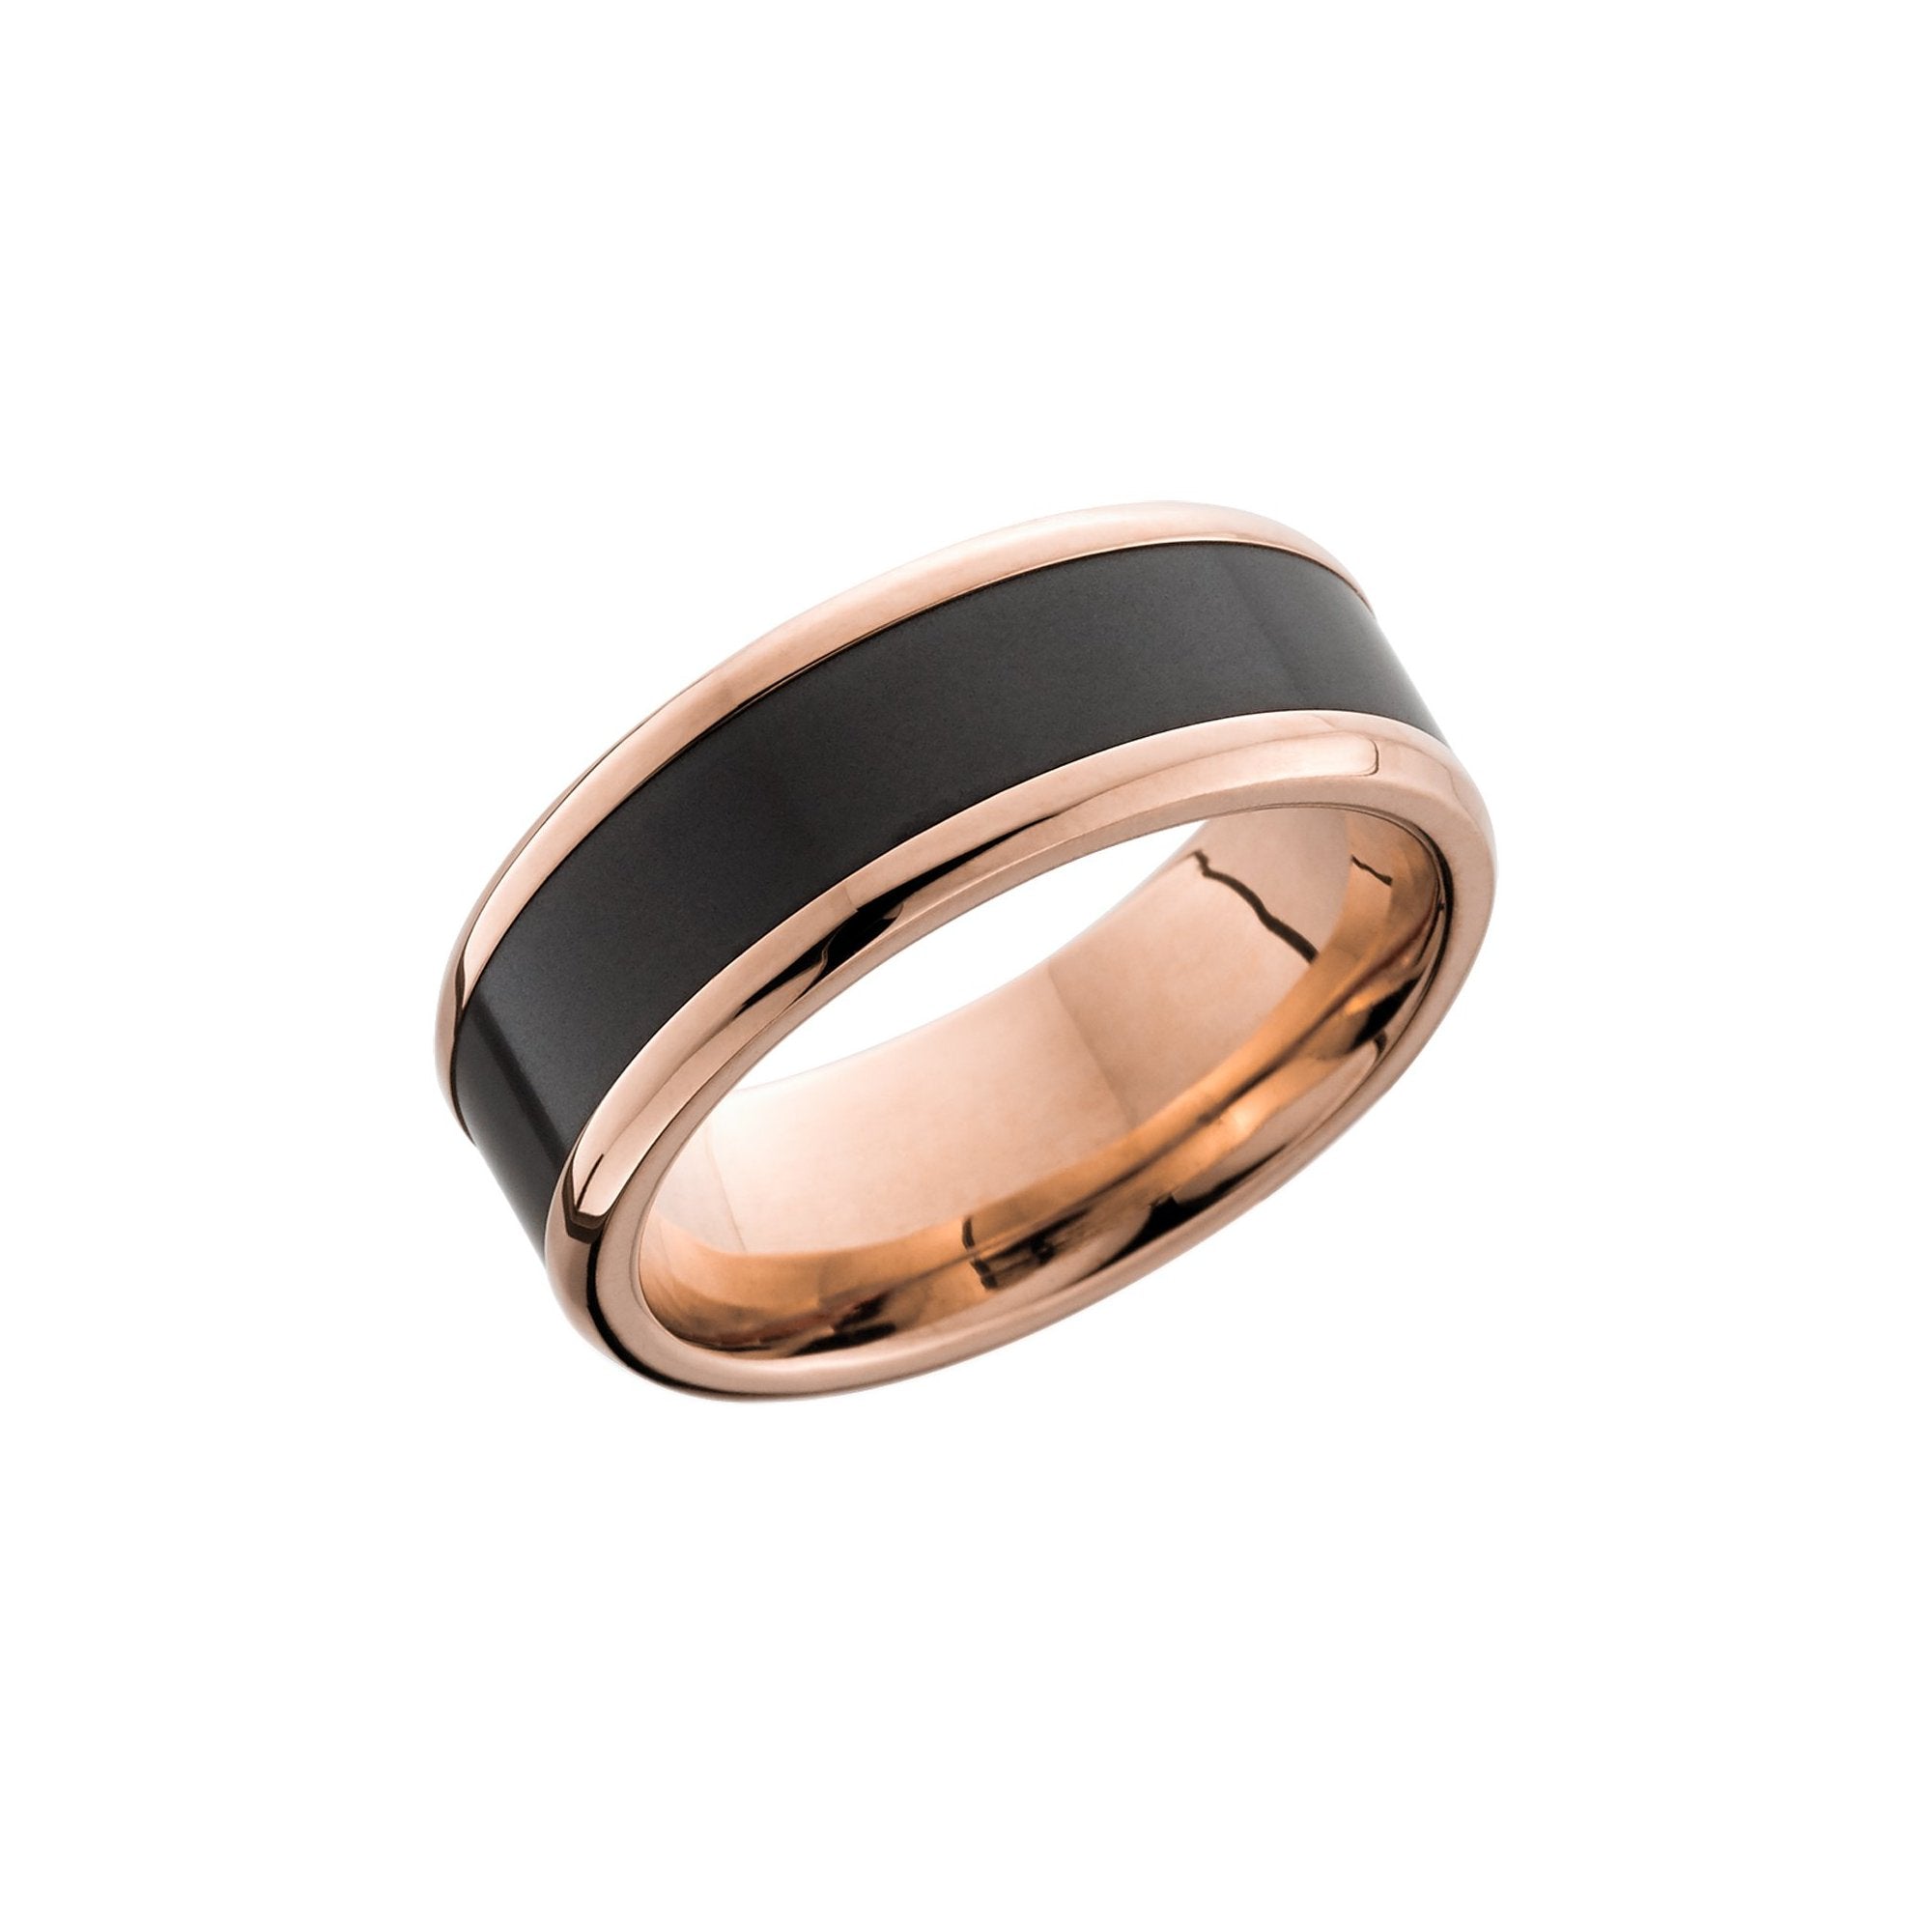 Ares 18k Rose Gold Band with Elysium Black Diamond Inlay - Talisman Collection Fine Jewelers